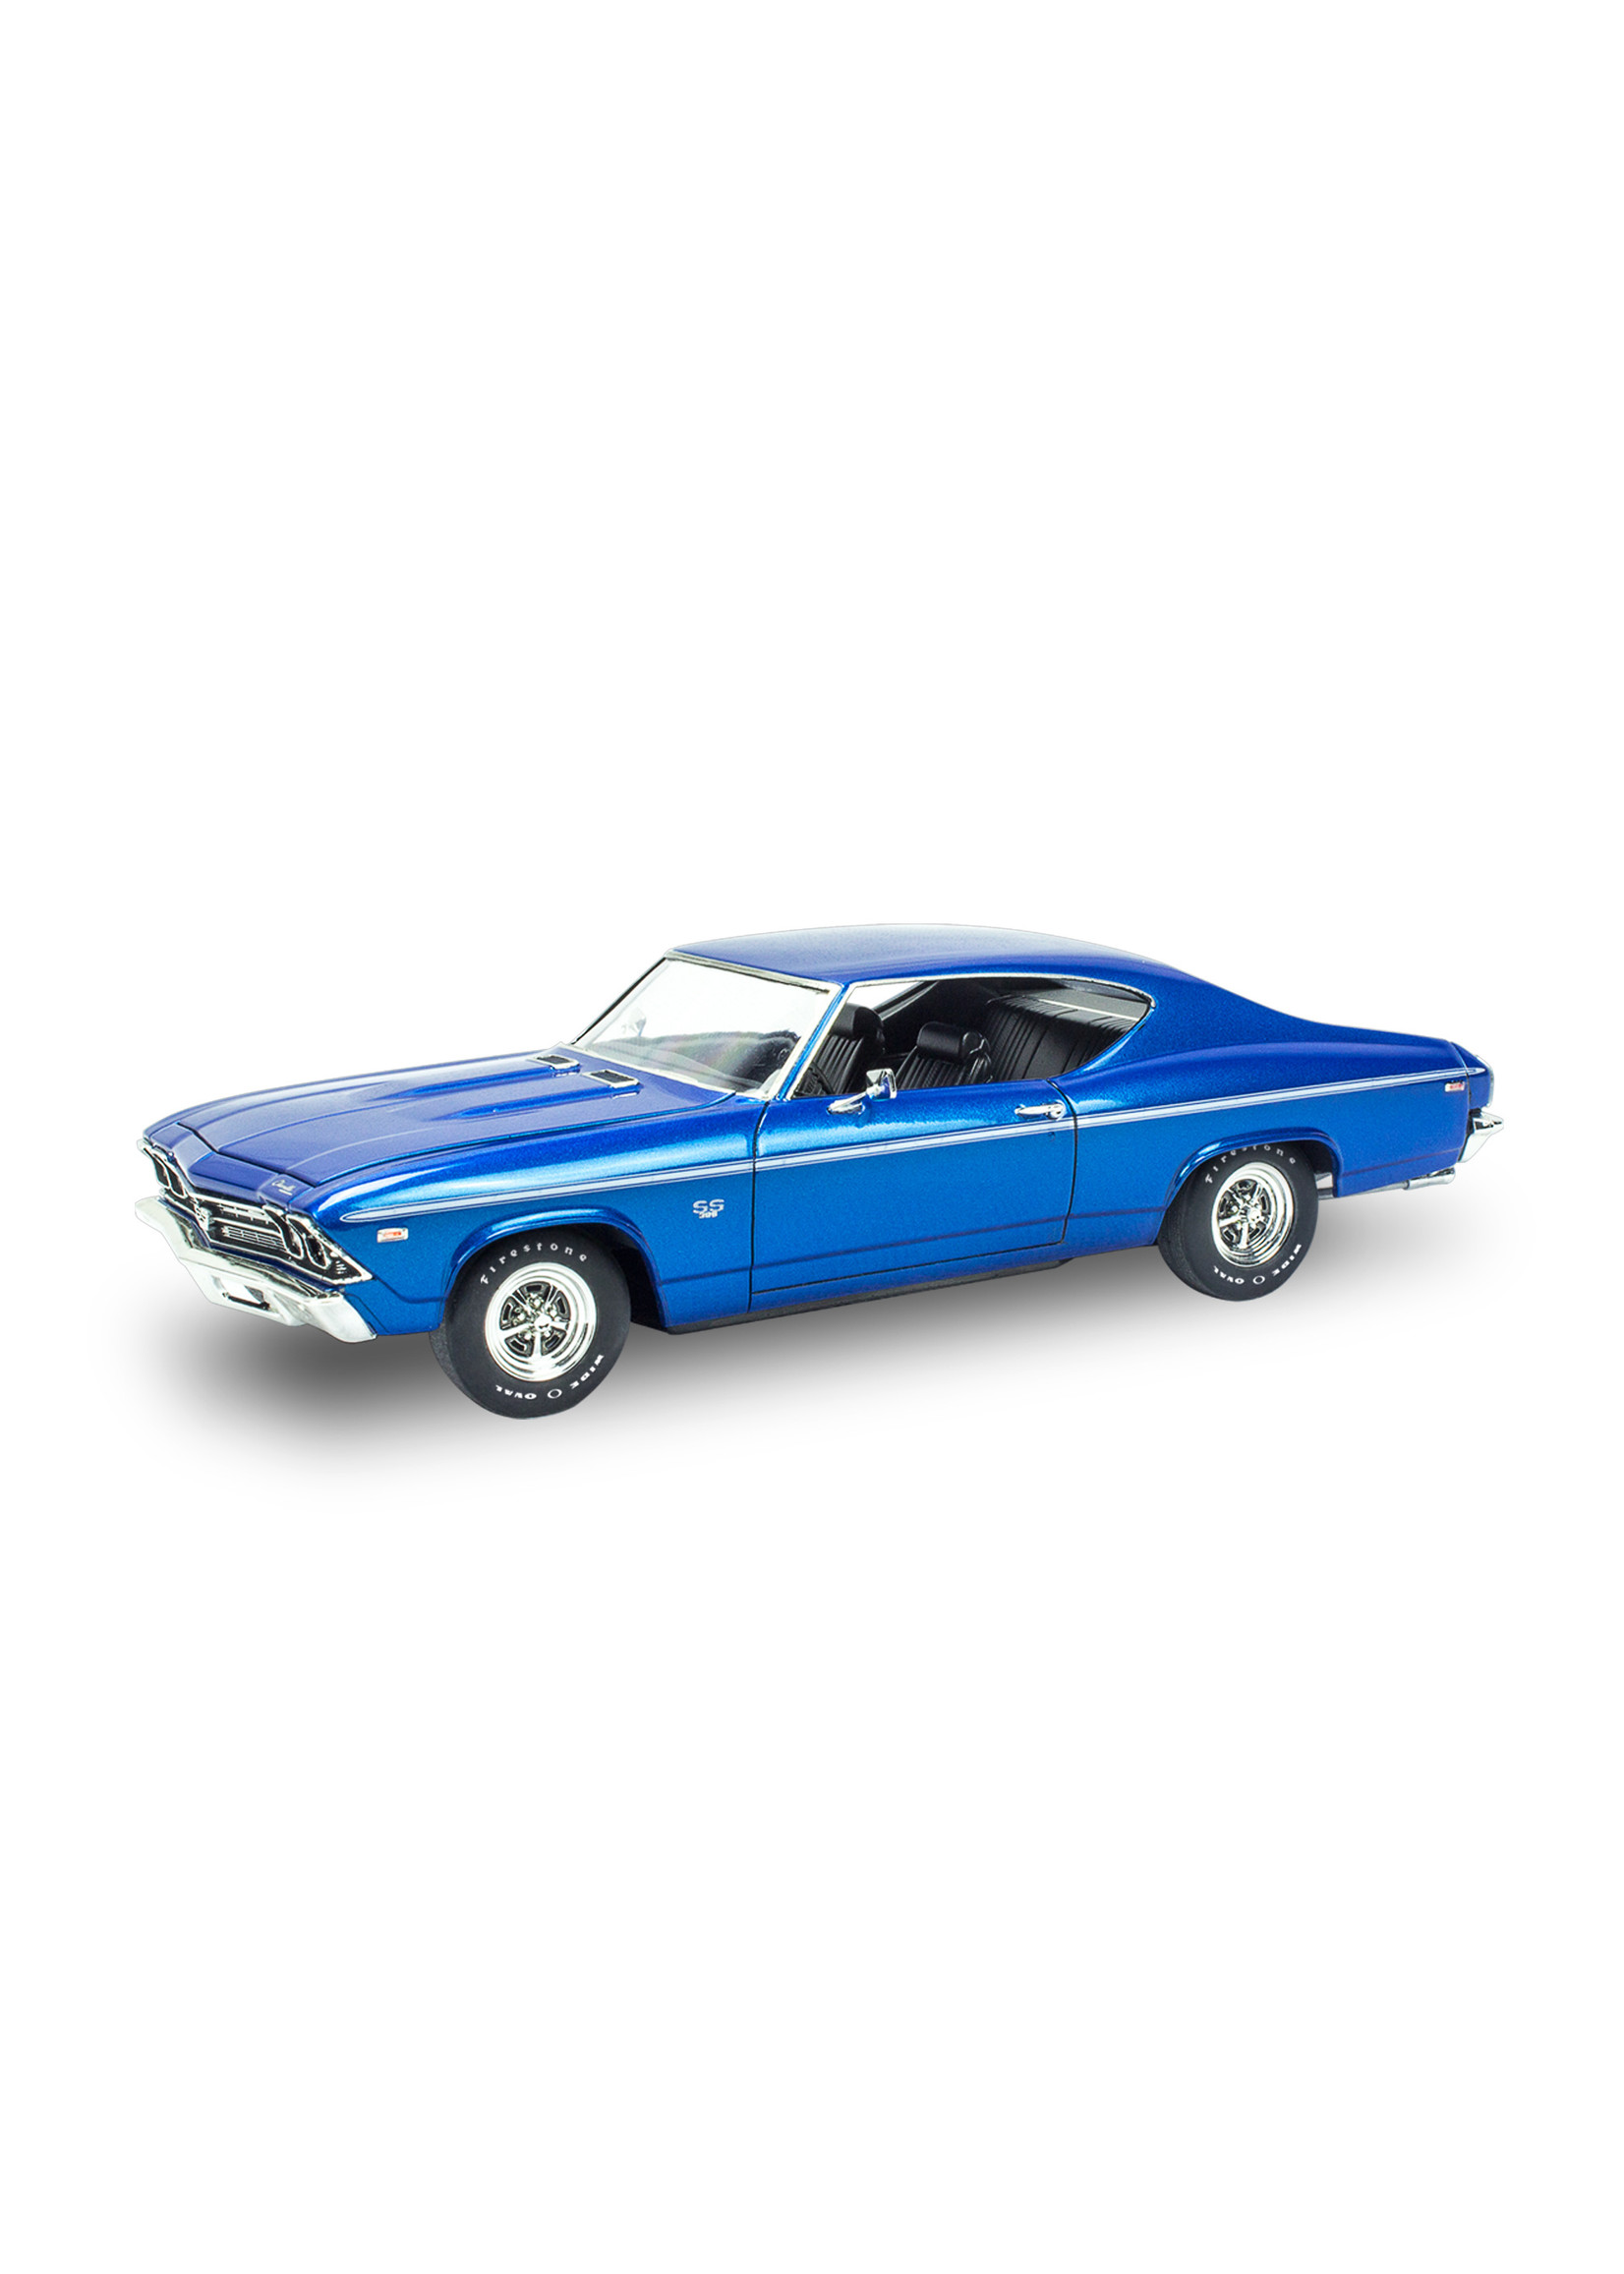 Revell 4492 - 1/25 1969 Chevy Chevelle SS 396